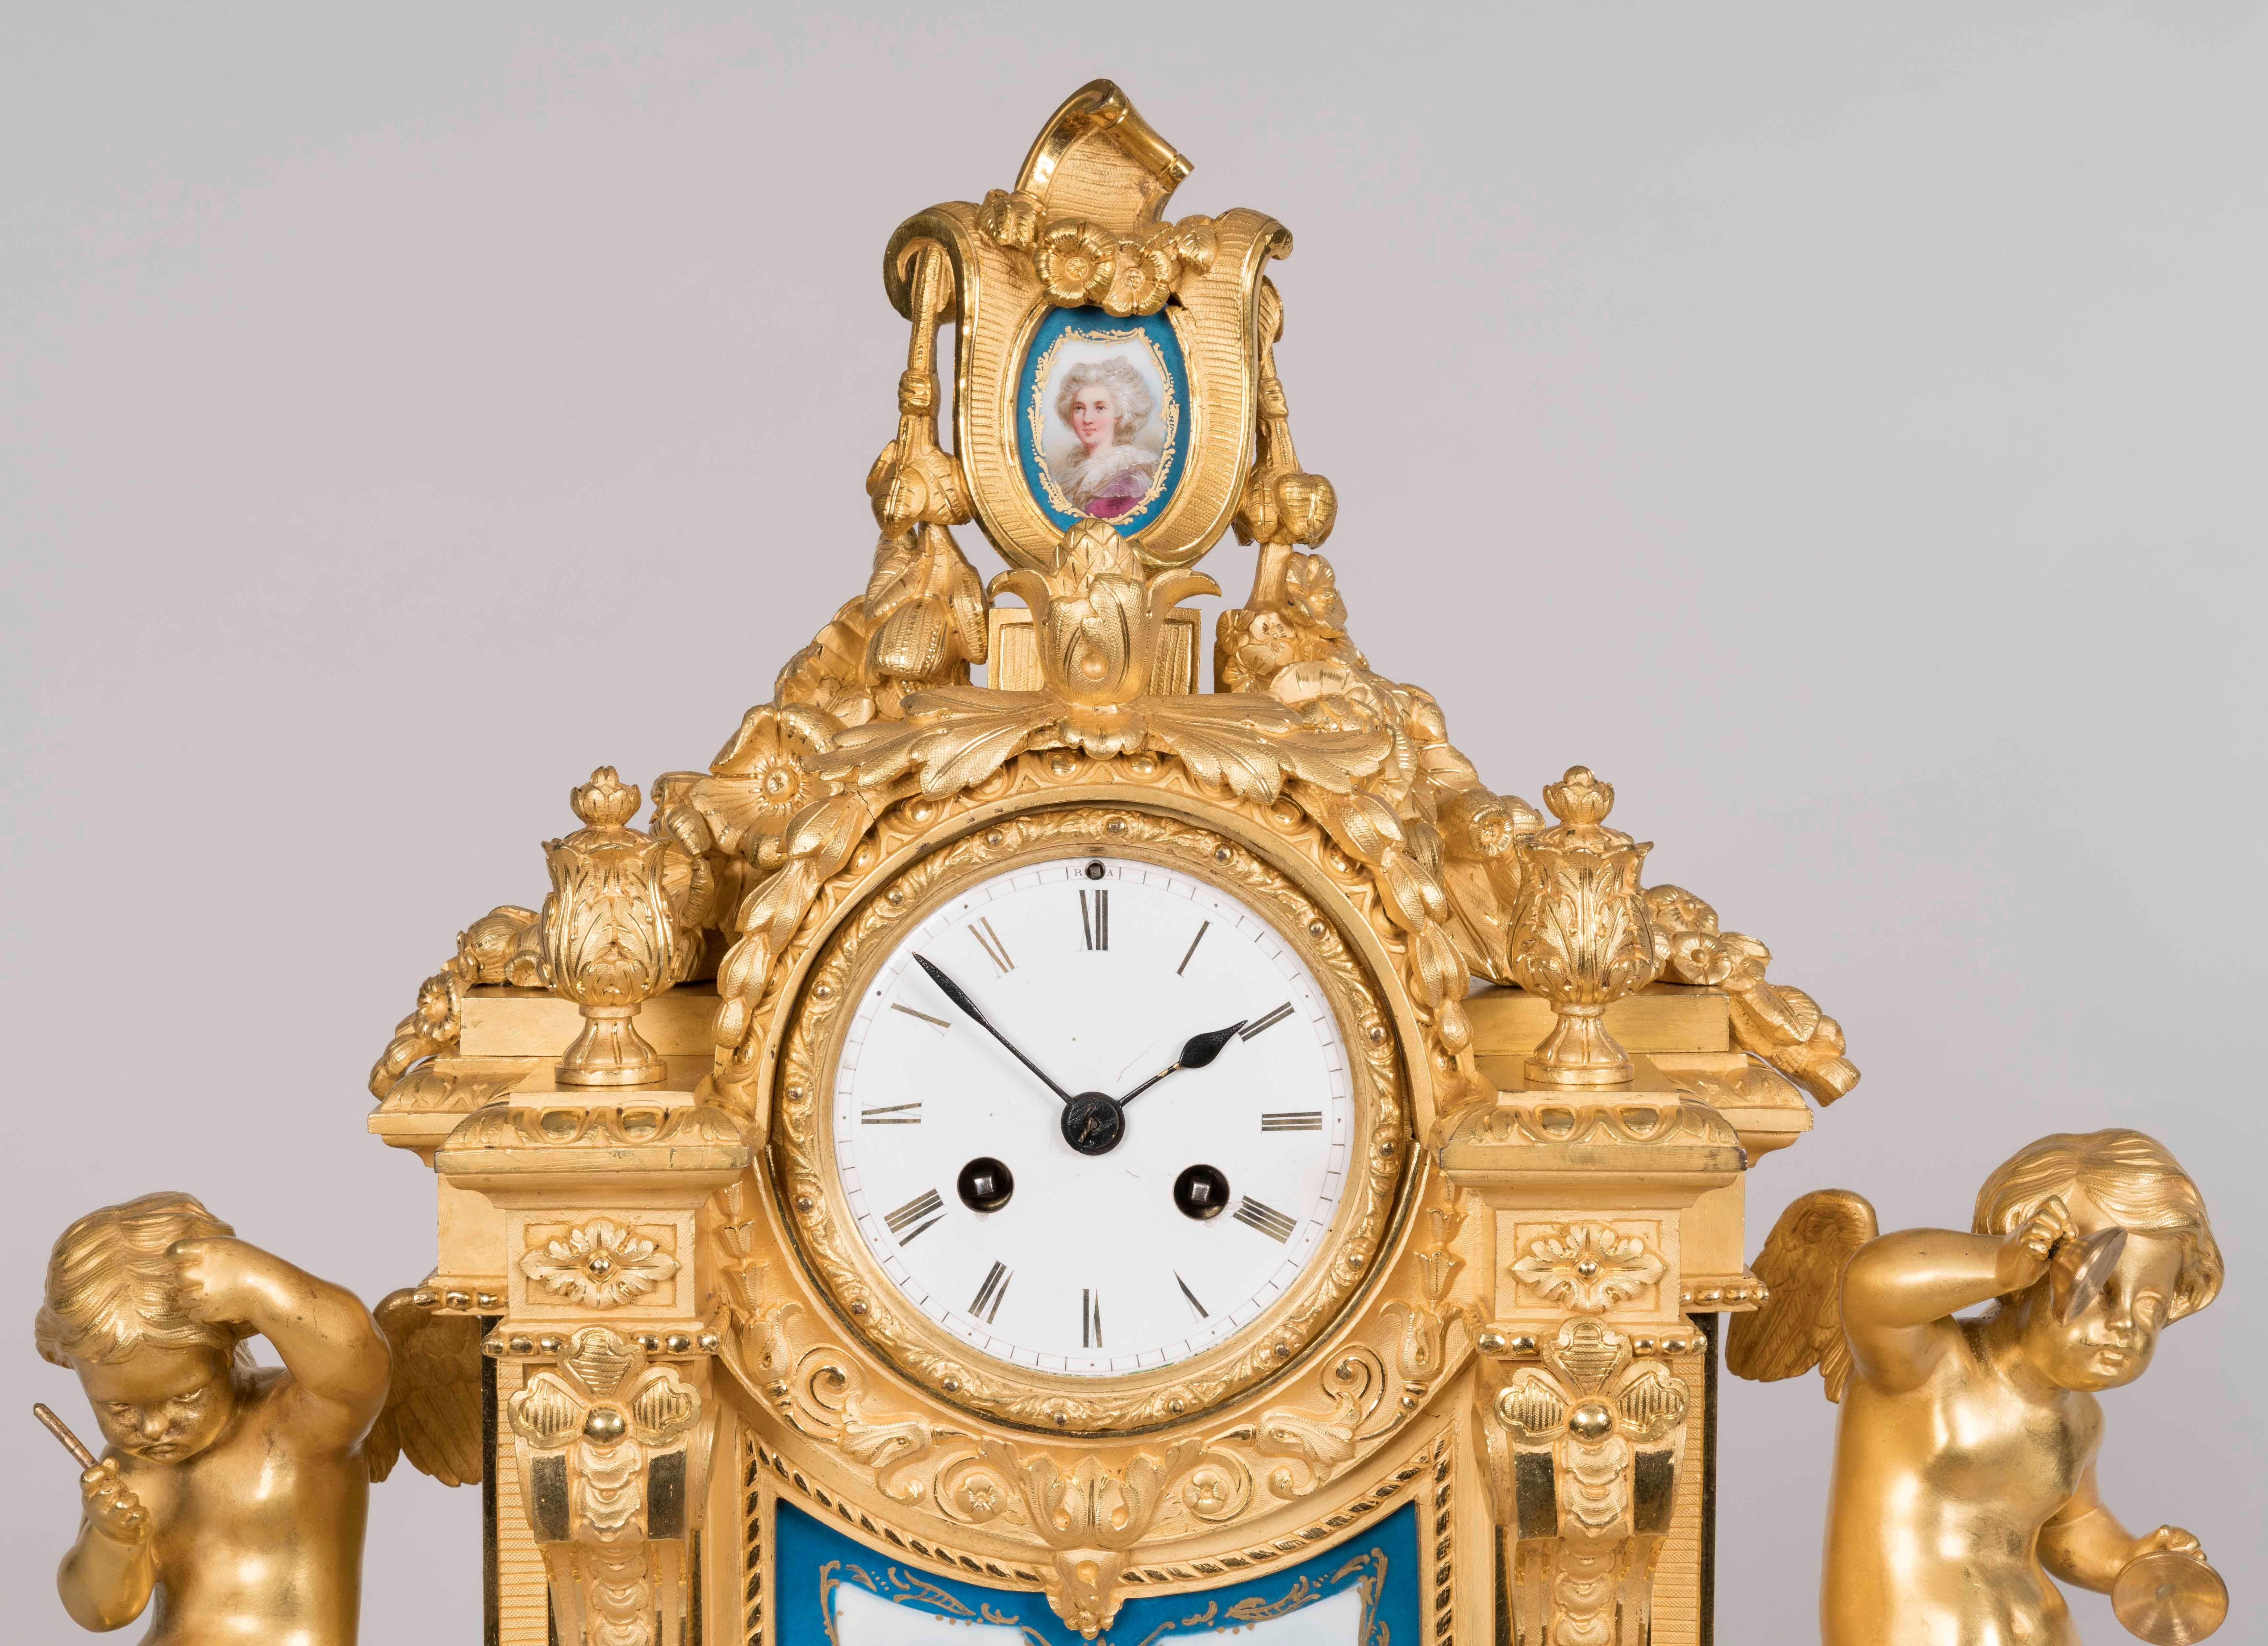 A mantle clock in the Louis XVI taste by Raingo Freres, Paris

Constructed in gilt bronze, and dressed with Bleu Celeste framed porcelain panels, decorated in polychromes, in the 'Sevres' manner, with swags, foliates and putti; rising from toupie